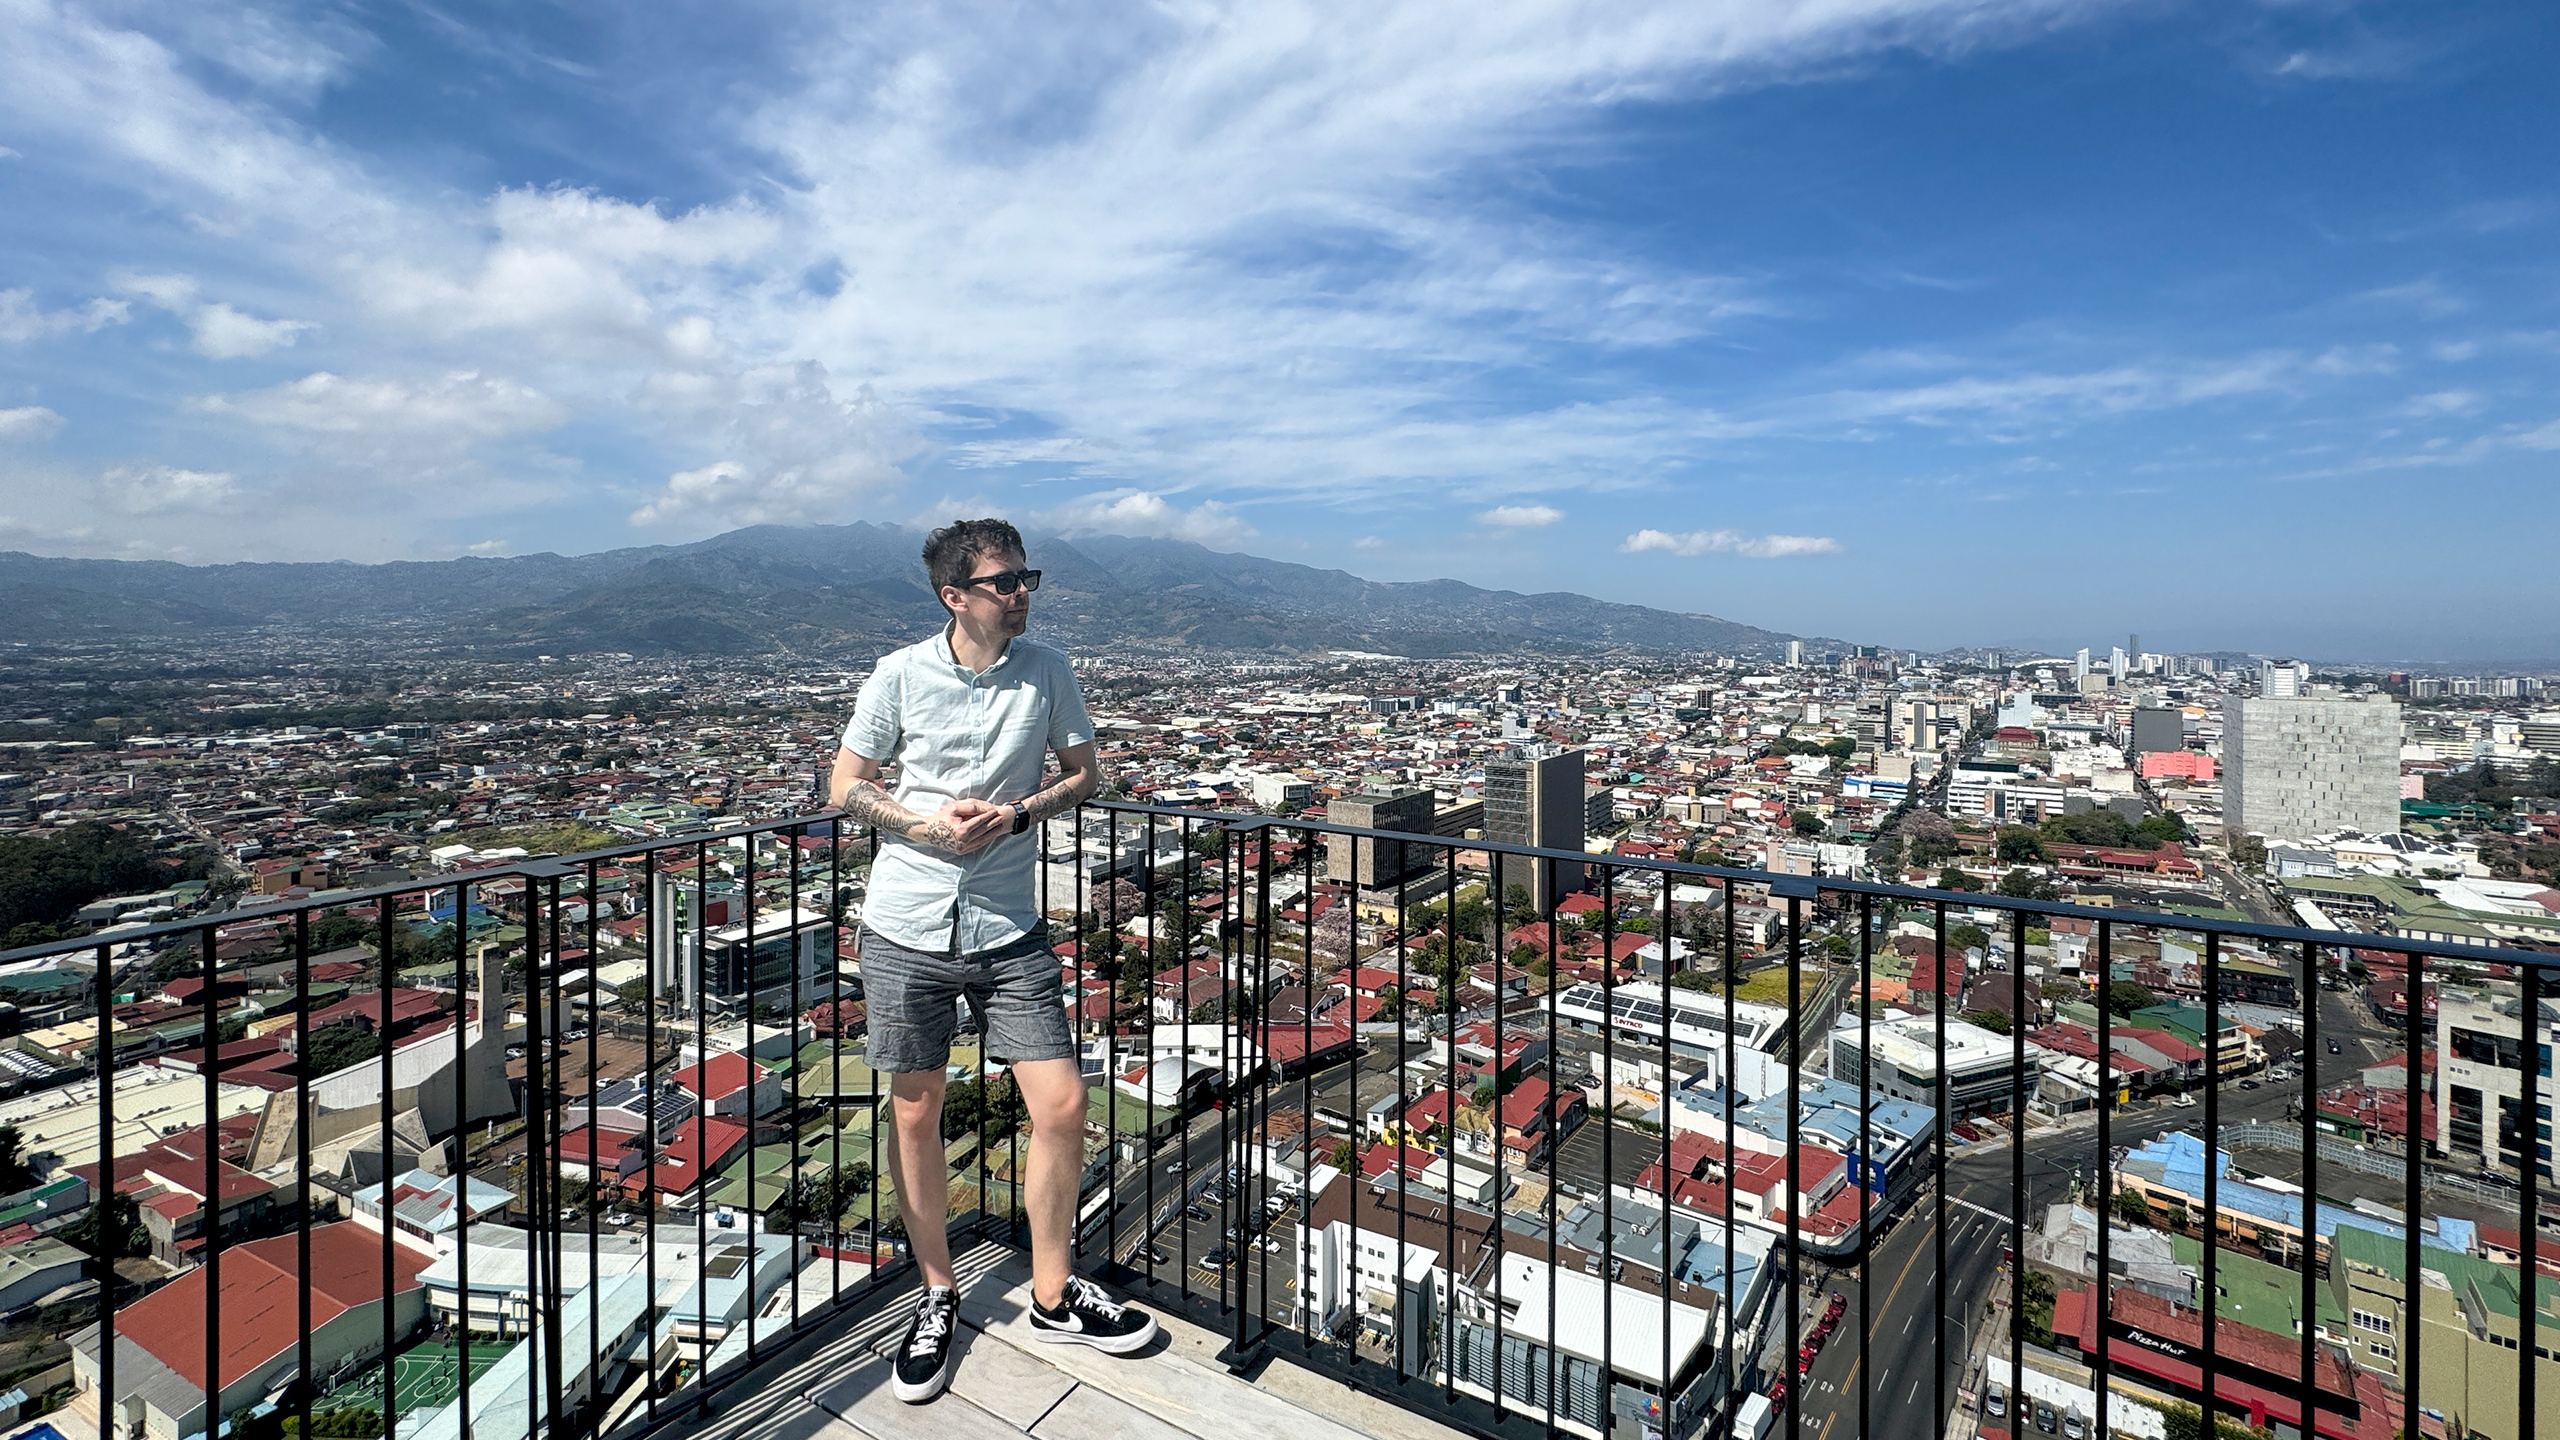 I traveled 5,372 miles to Costa Rica — here are 5 gadgets I couldnt live without